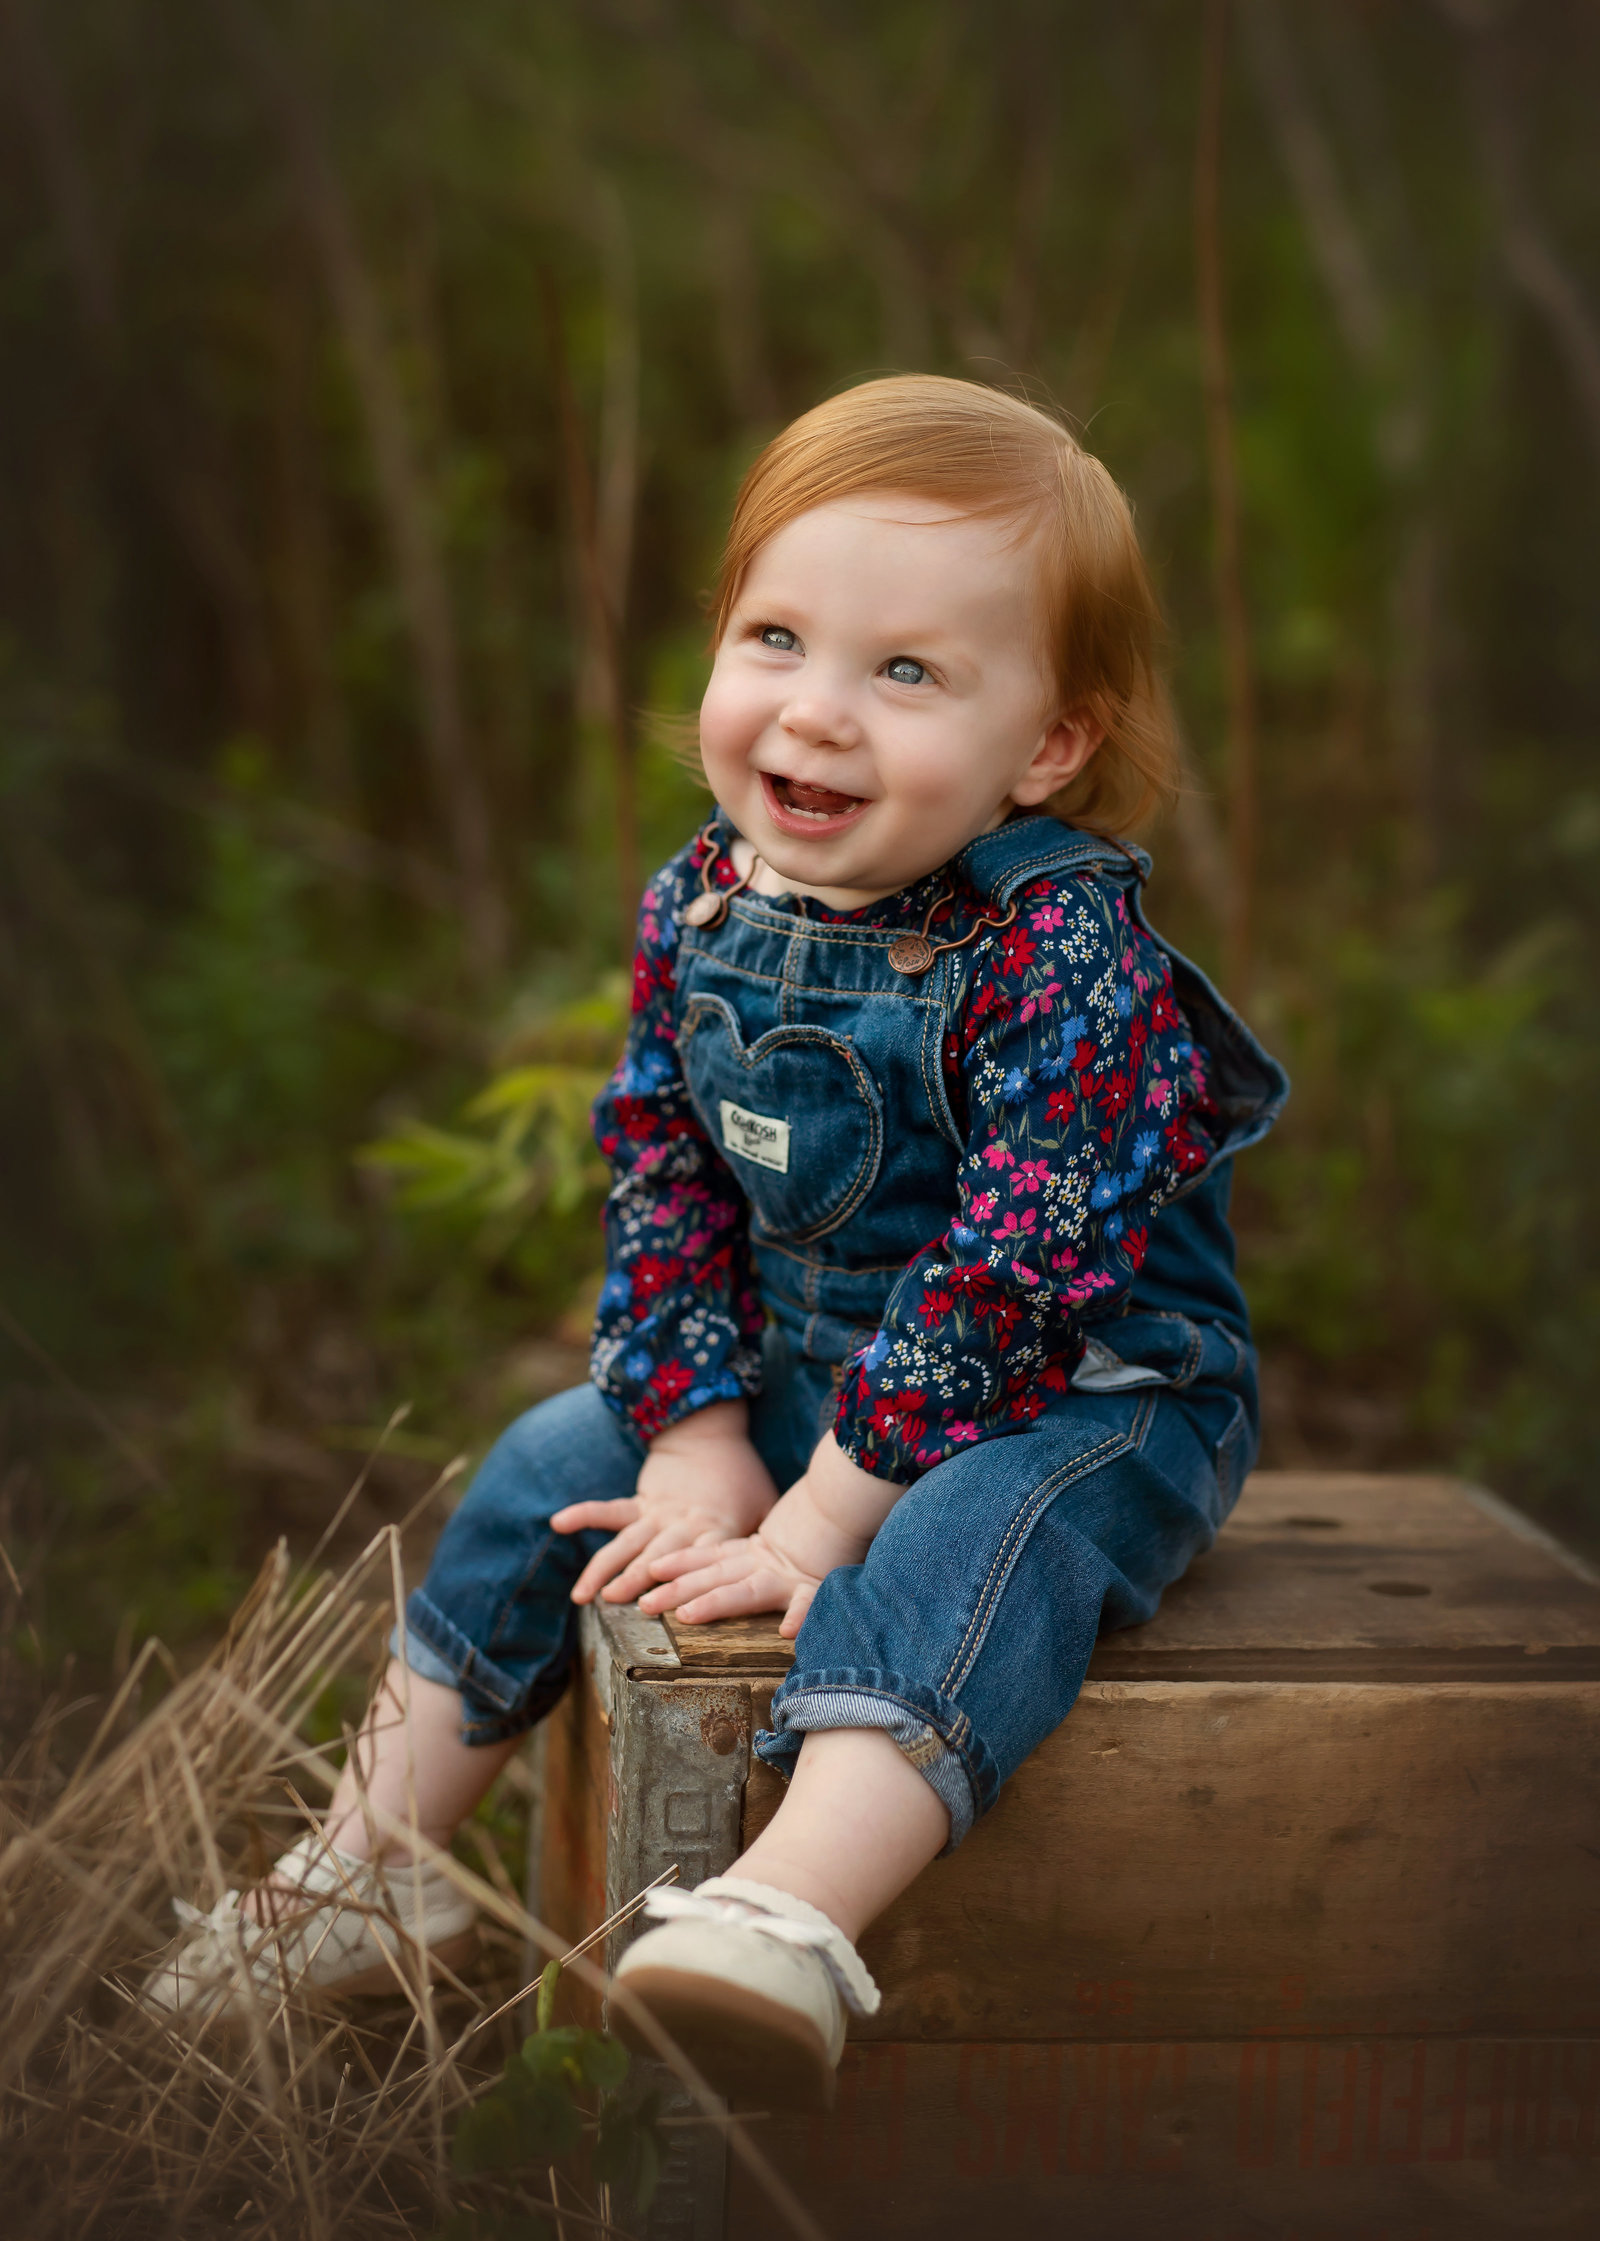 red headed baby in overalls smiling while sitting on a wooden box outside